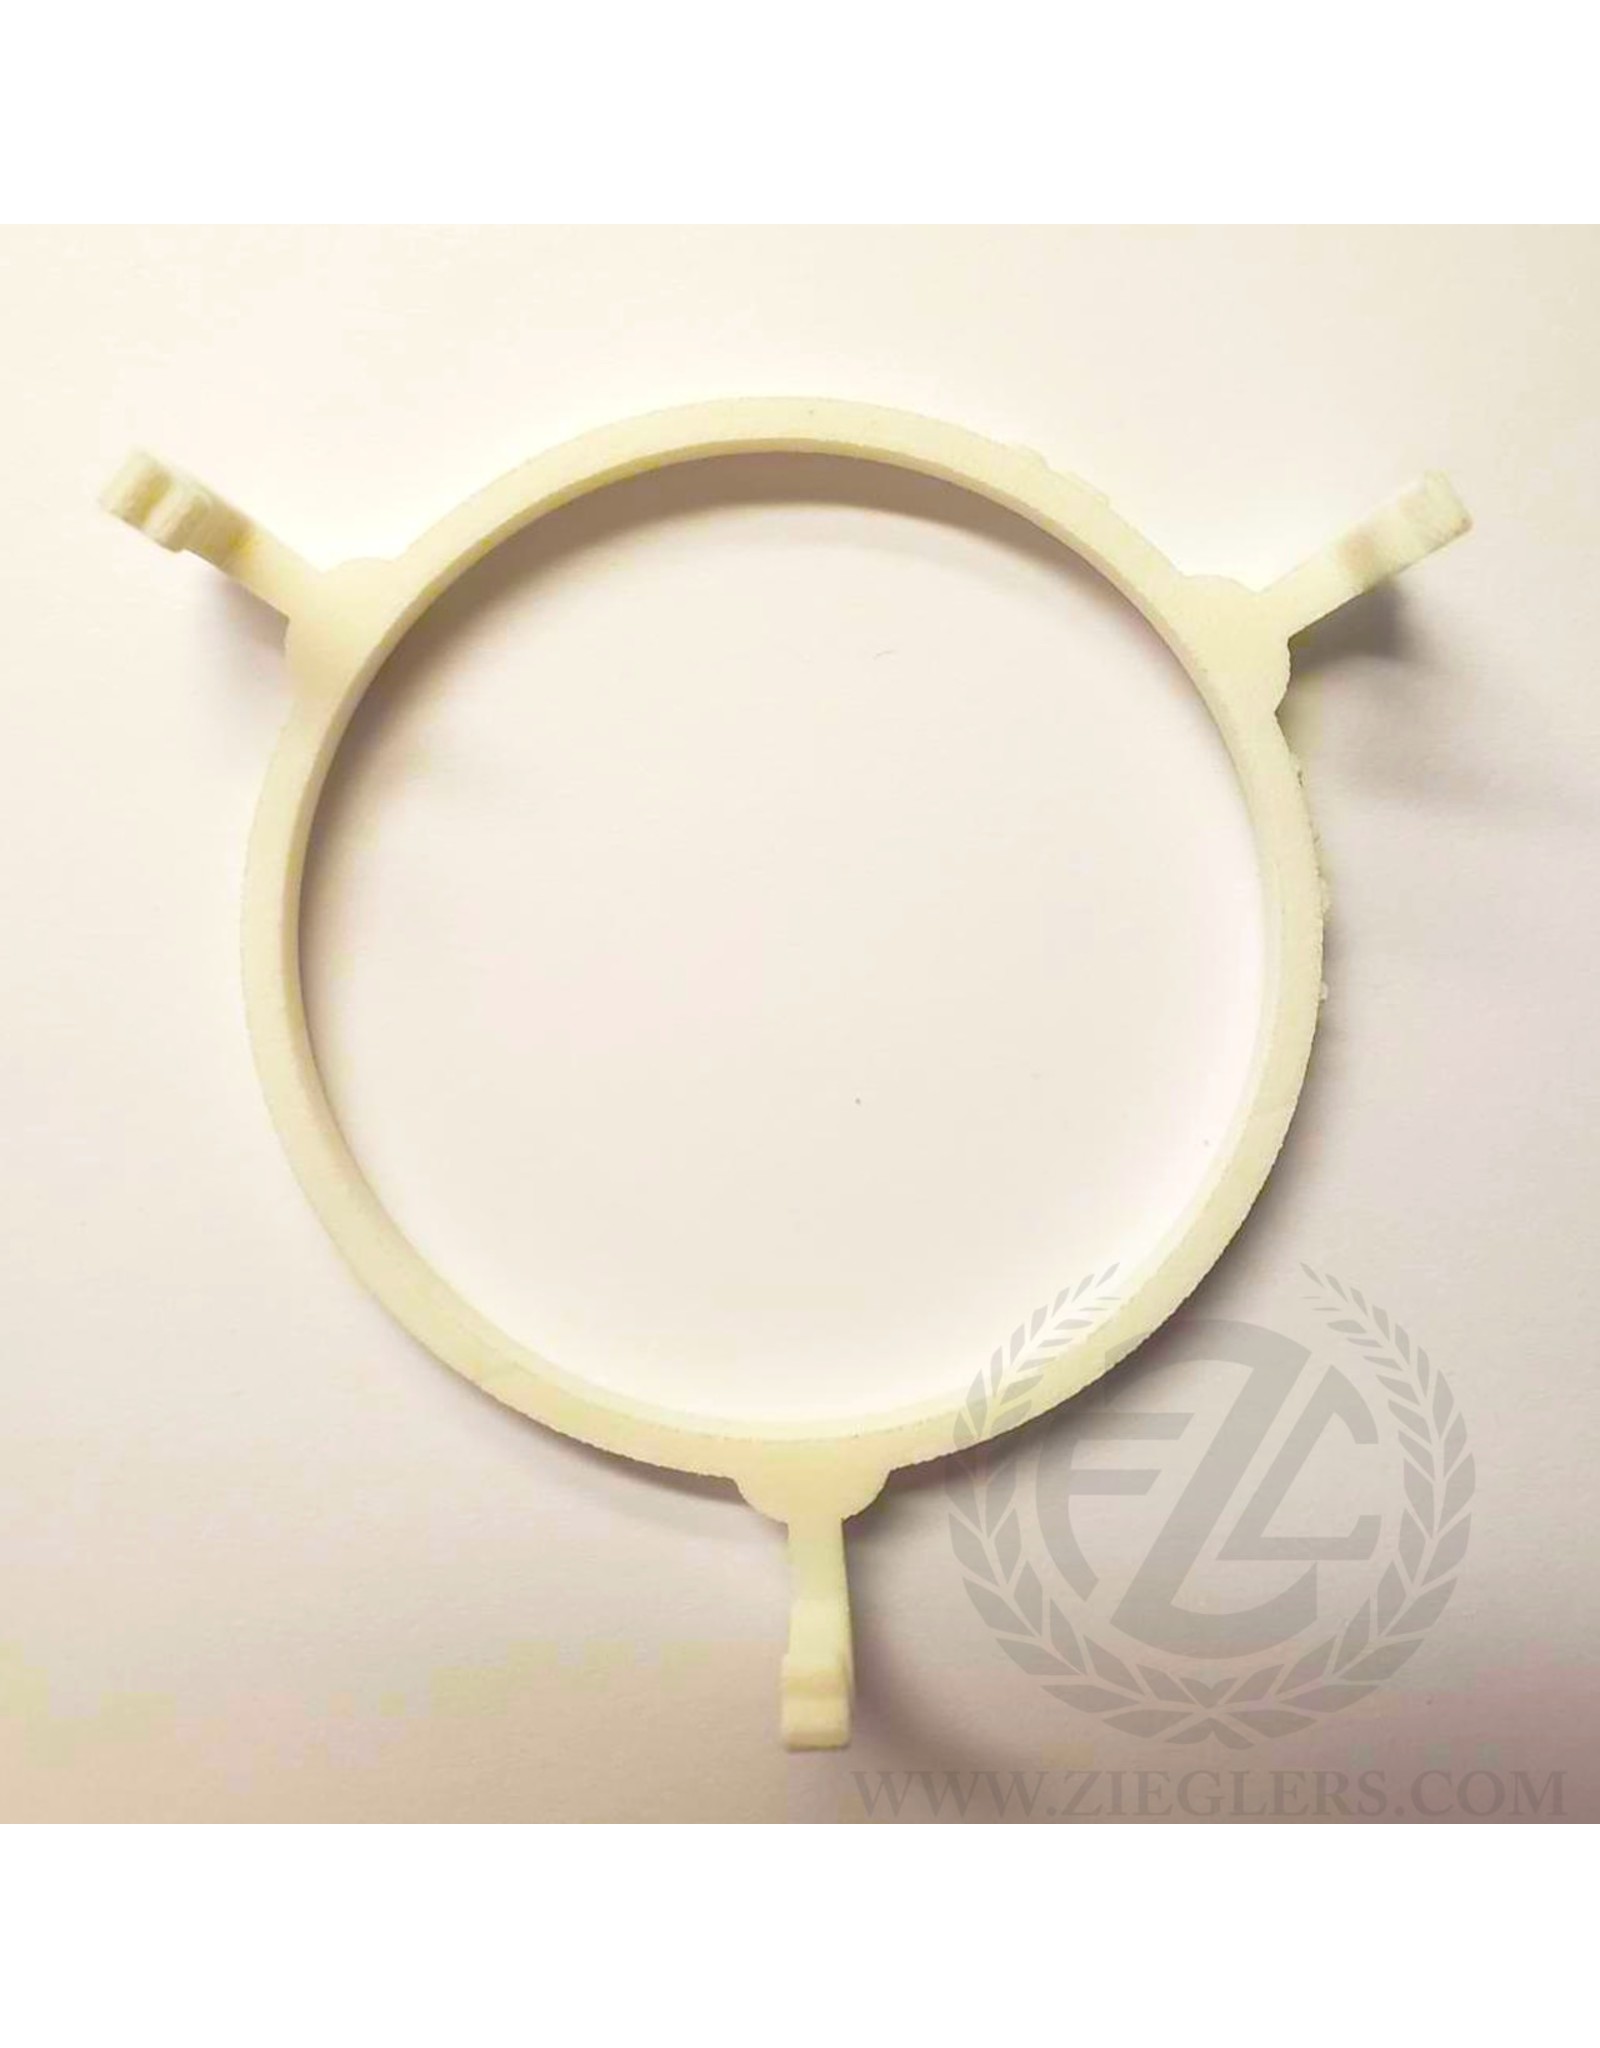 Ziegler Deflector Glass Base Ring for Candle Diameters: